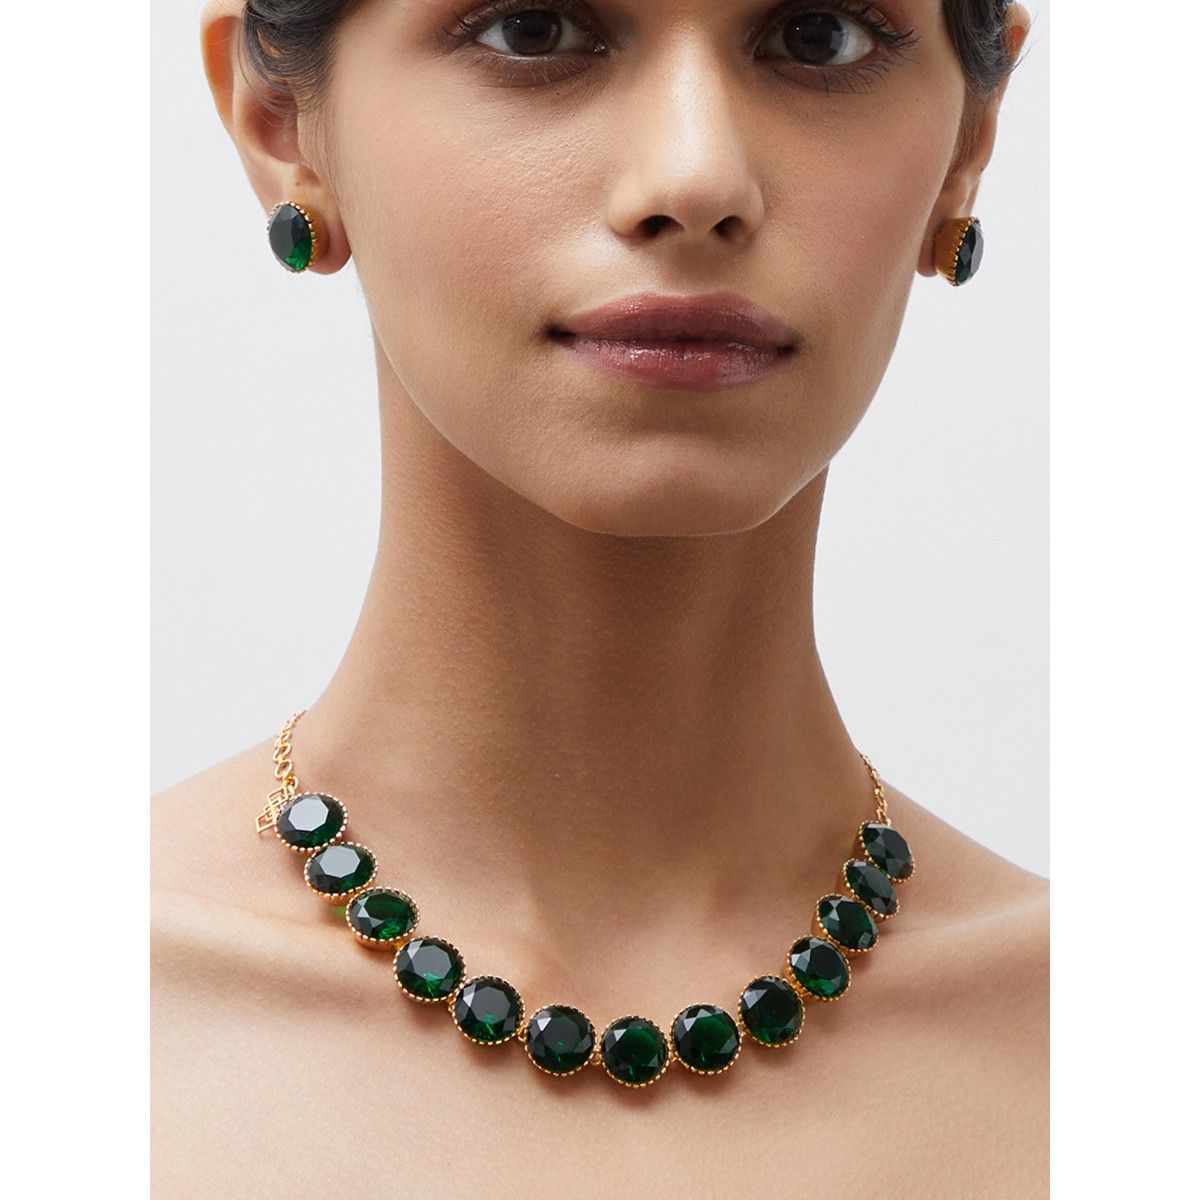 Etnico Pearl Base Metal and Emerald Choker Necklace Set With Mang Tika